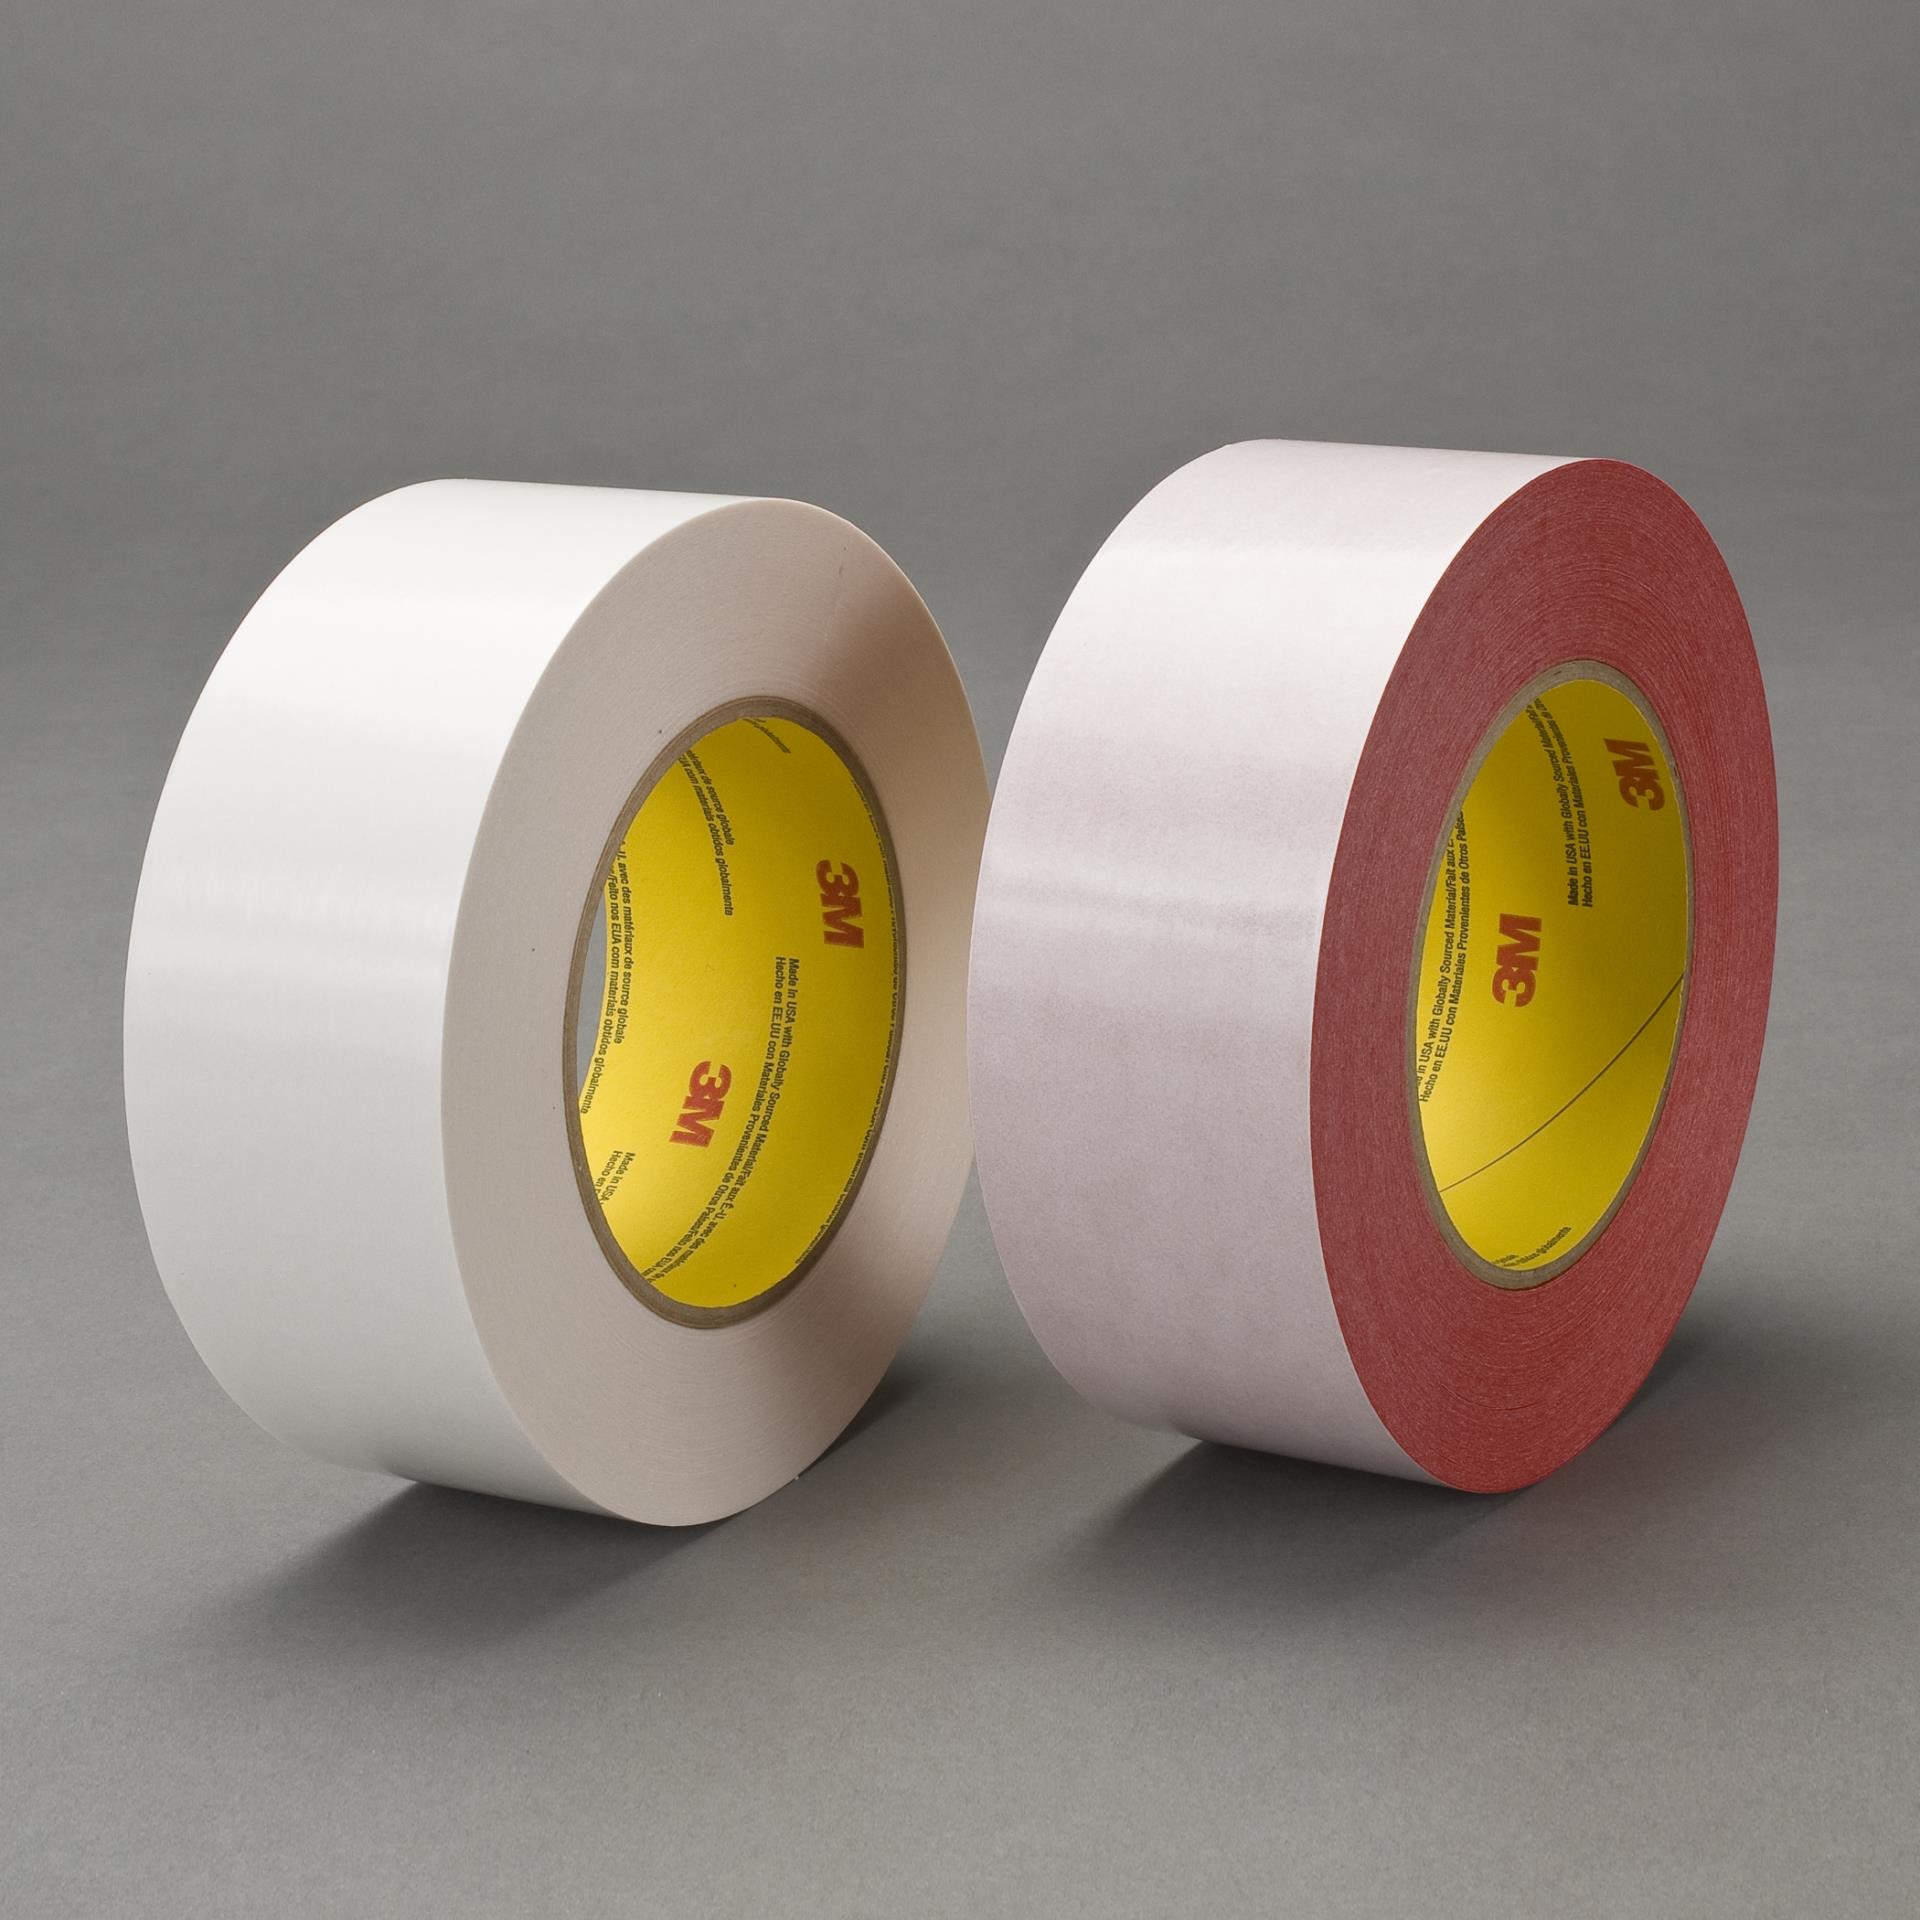 00051111187029 | 3M™ Double Coated Tape 9738, Clear, 12 mm x 55 m